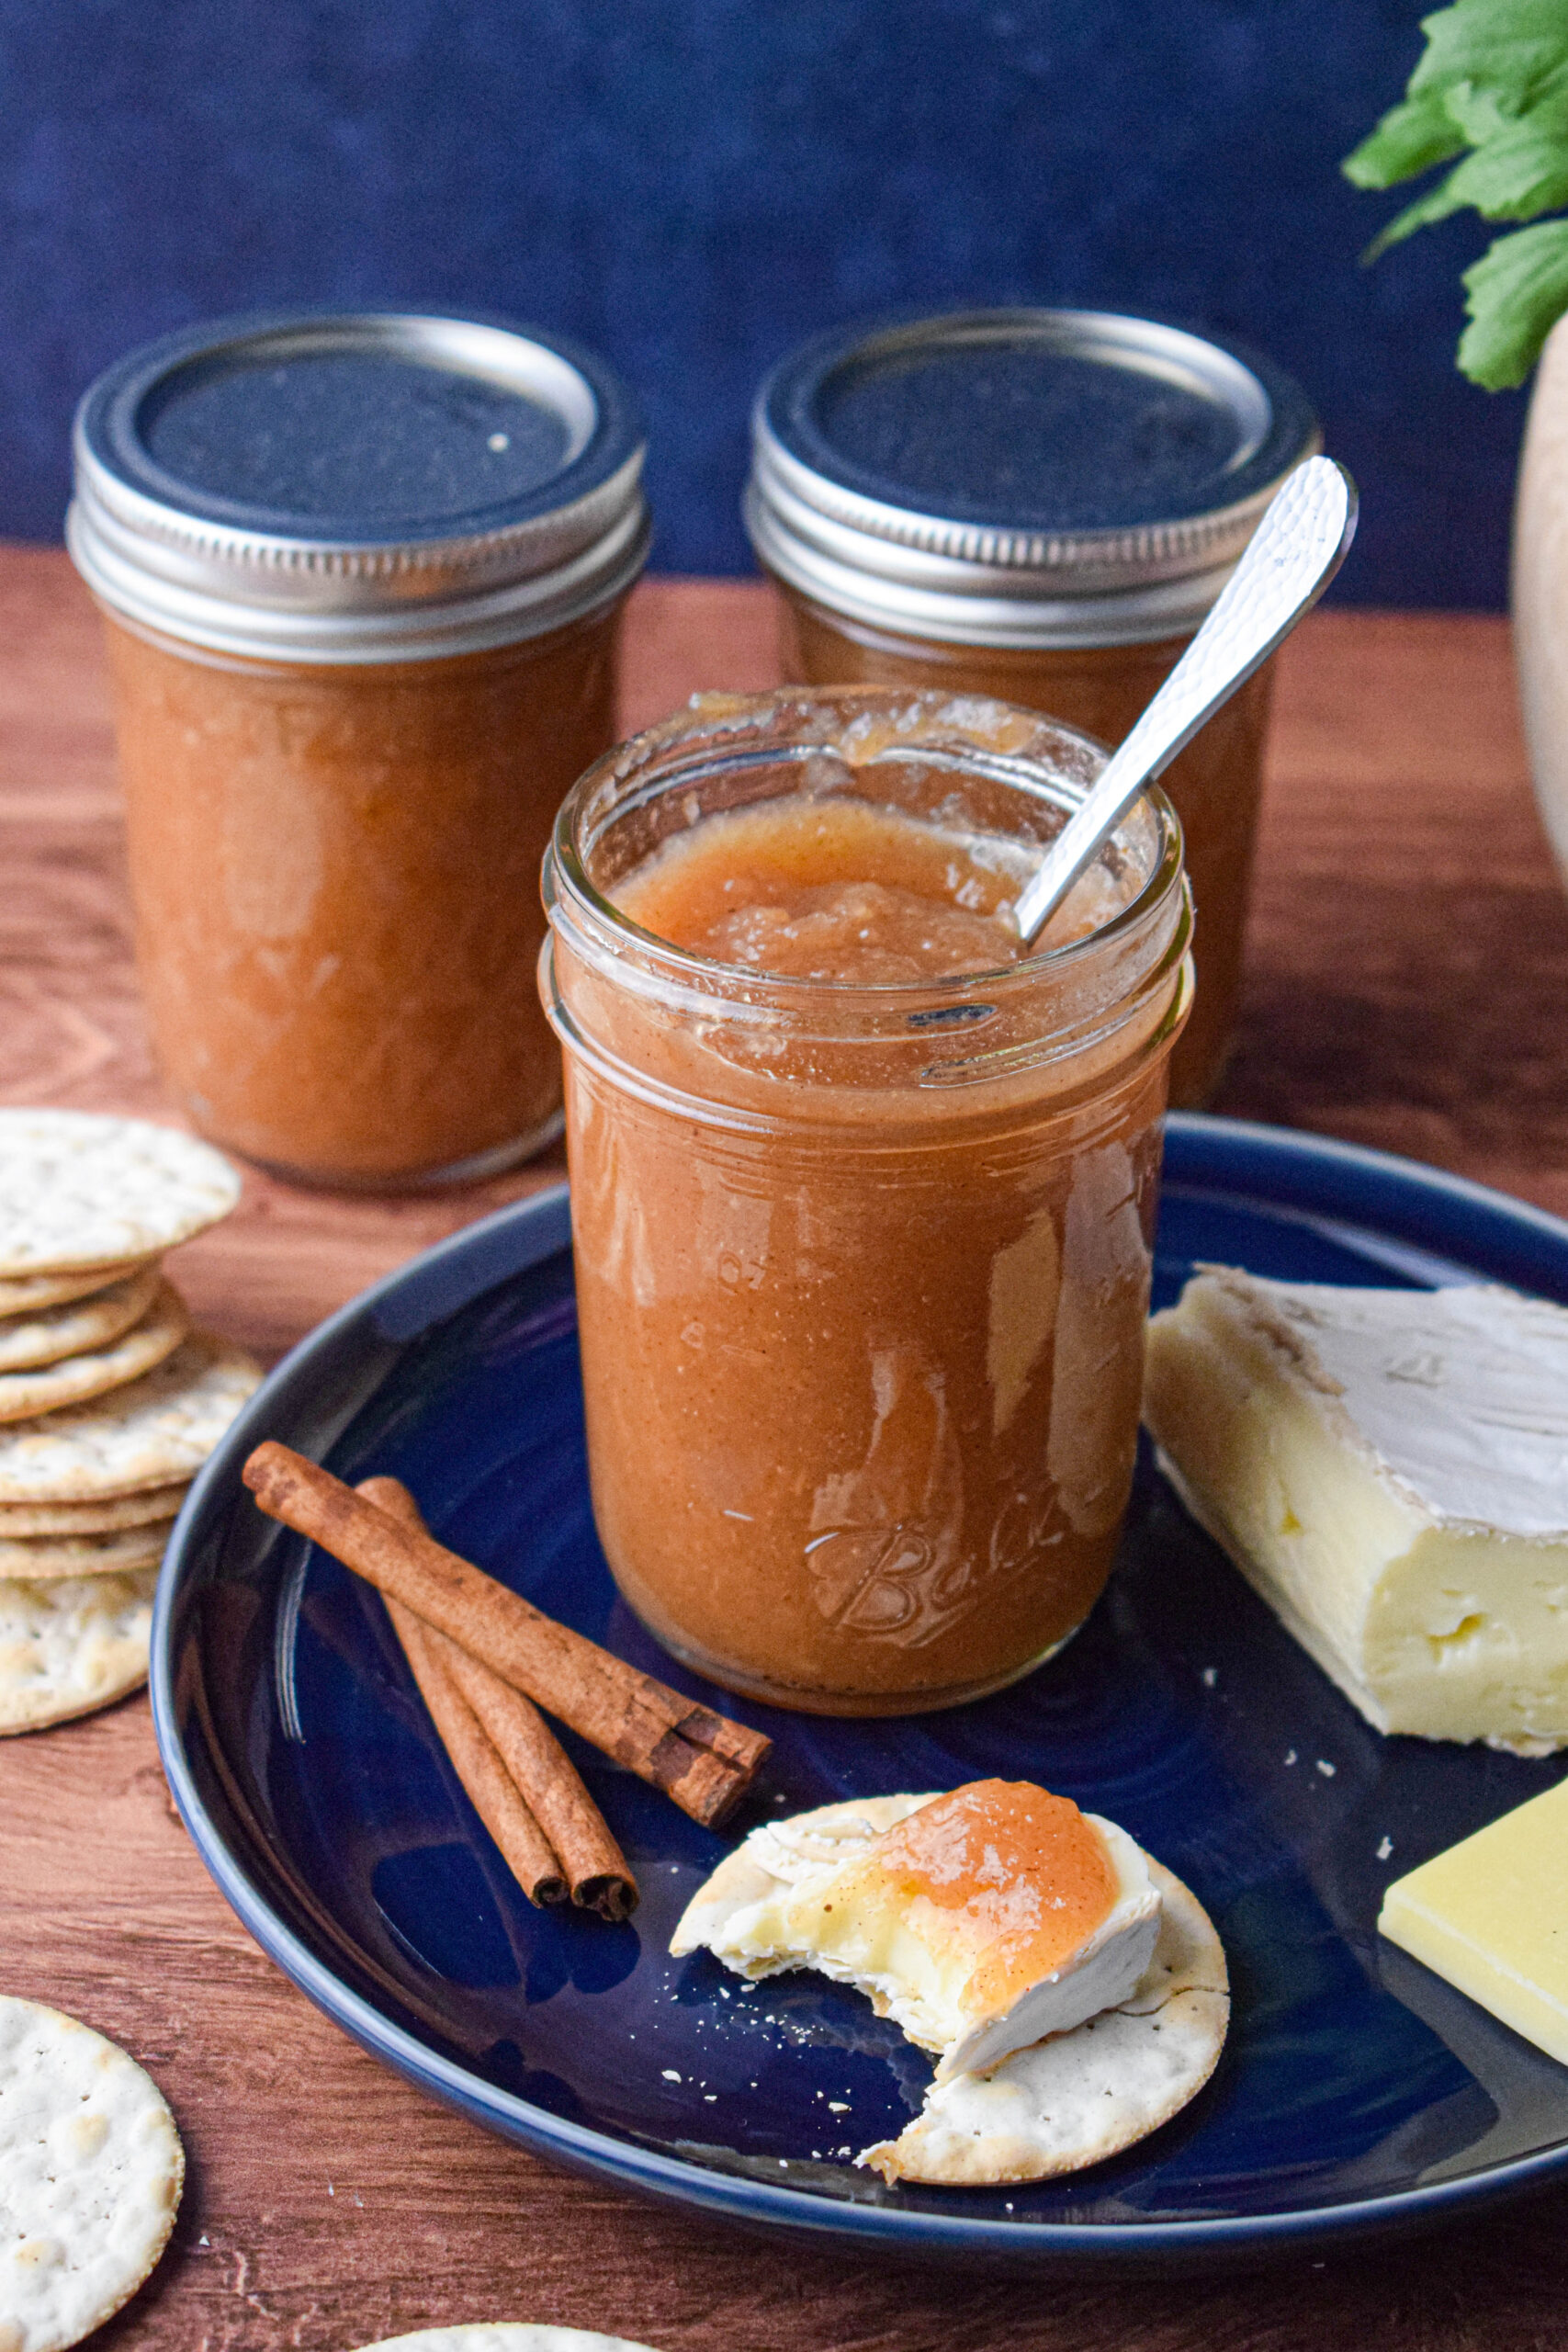 mason jars of spiced pear butter on a blue plate with crackers and cheese